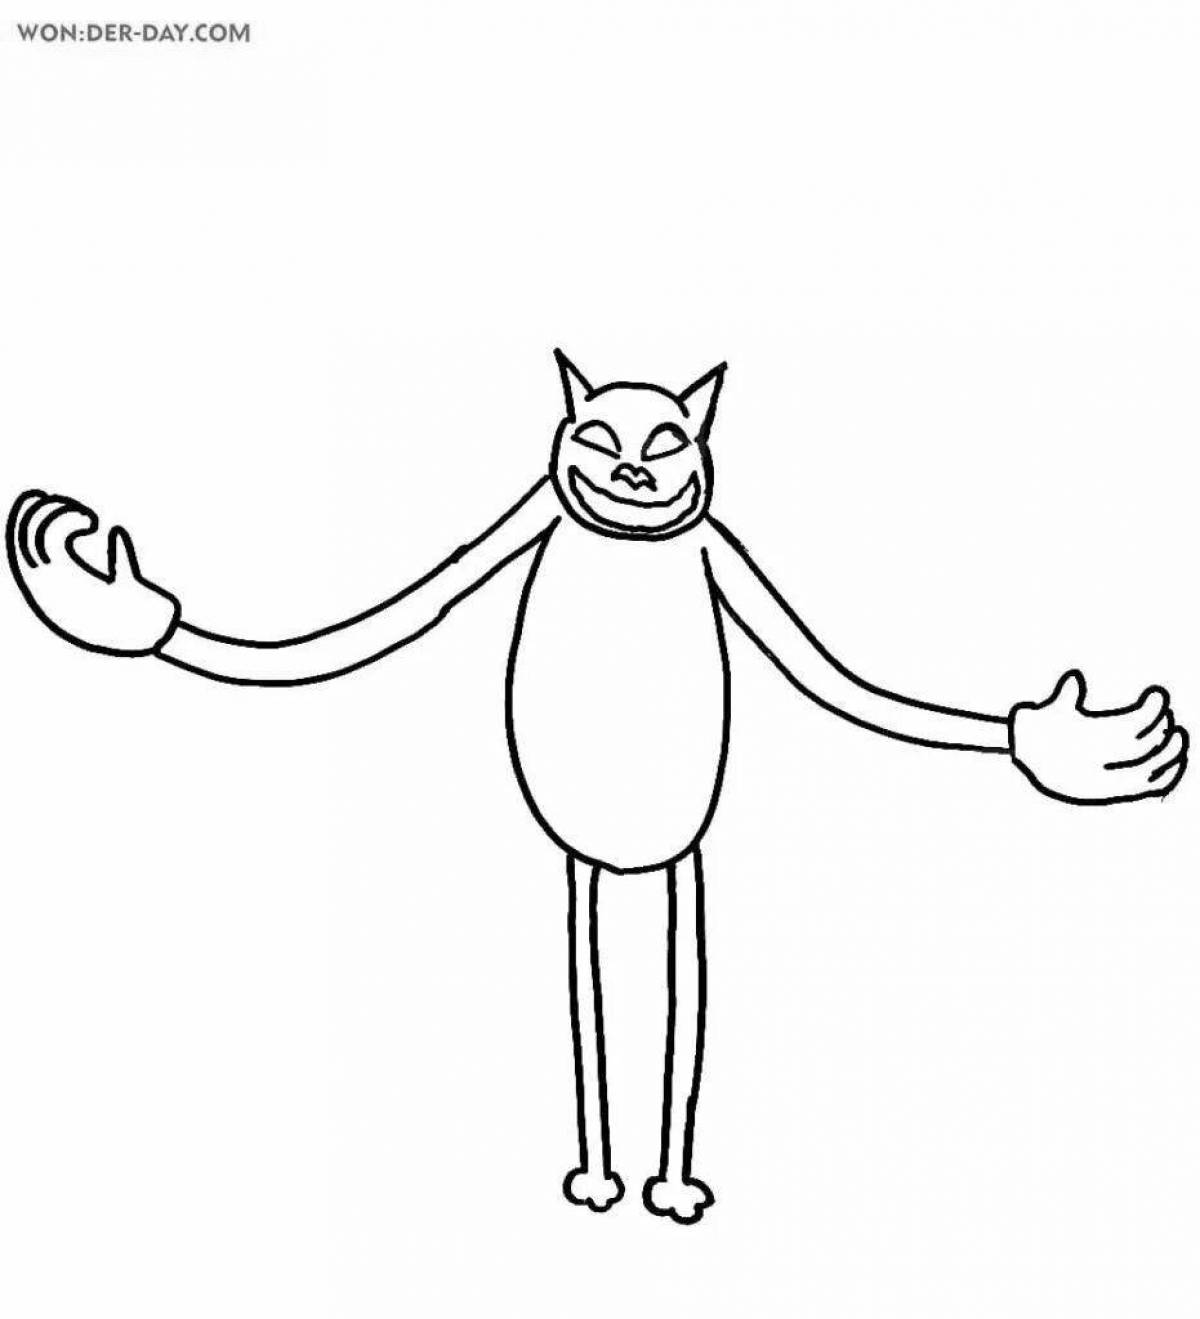 Colorful cartoon cat coloring page